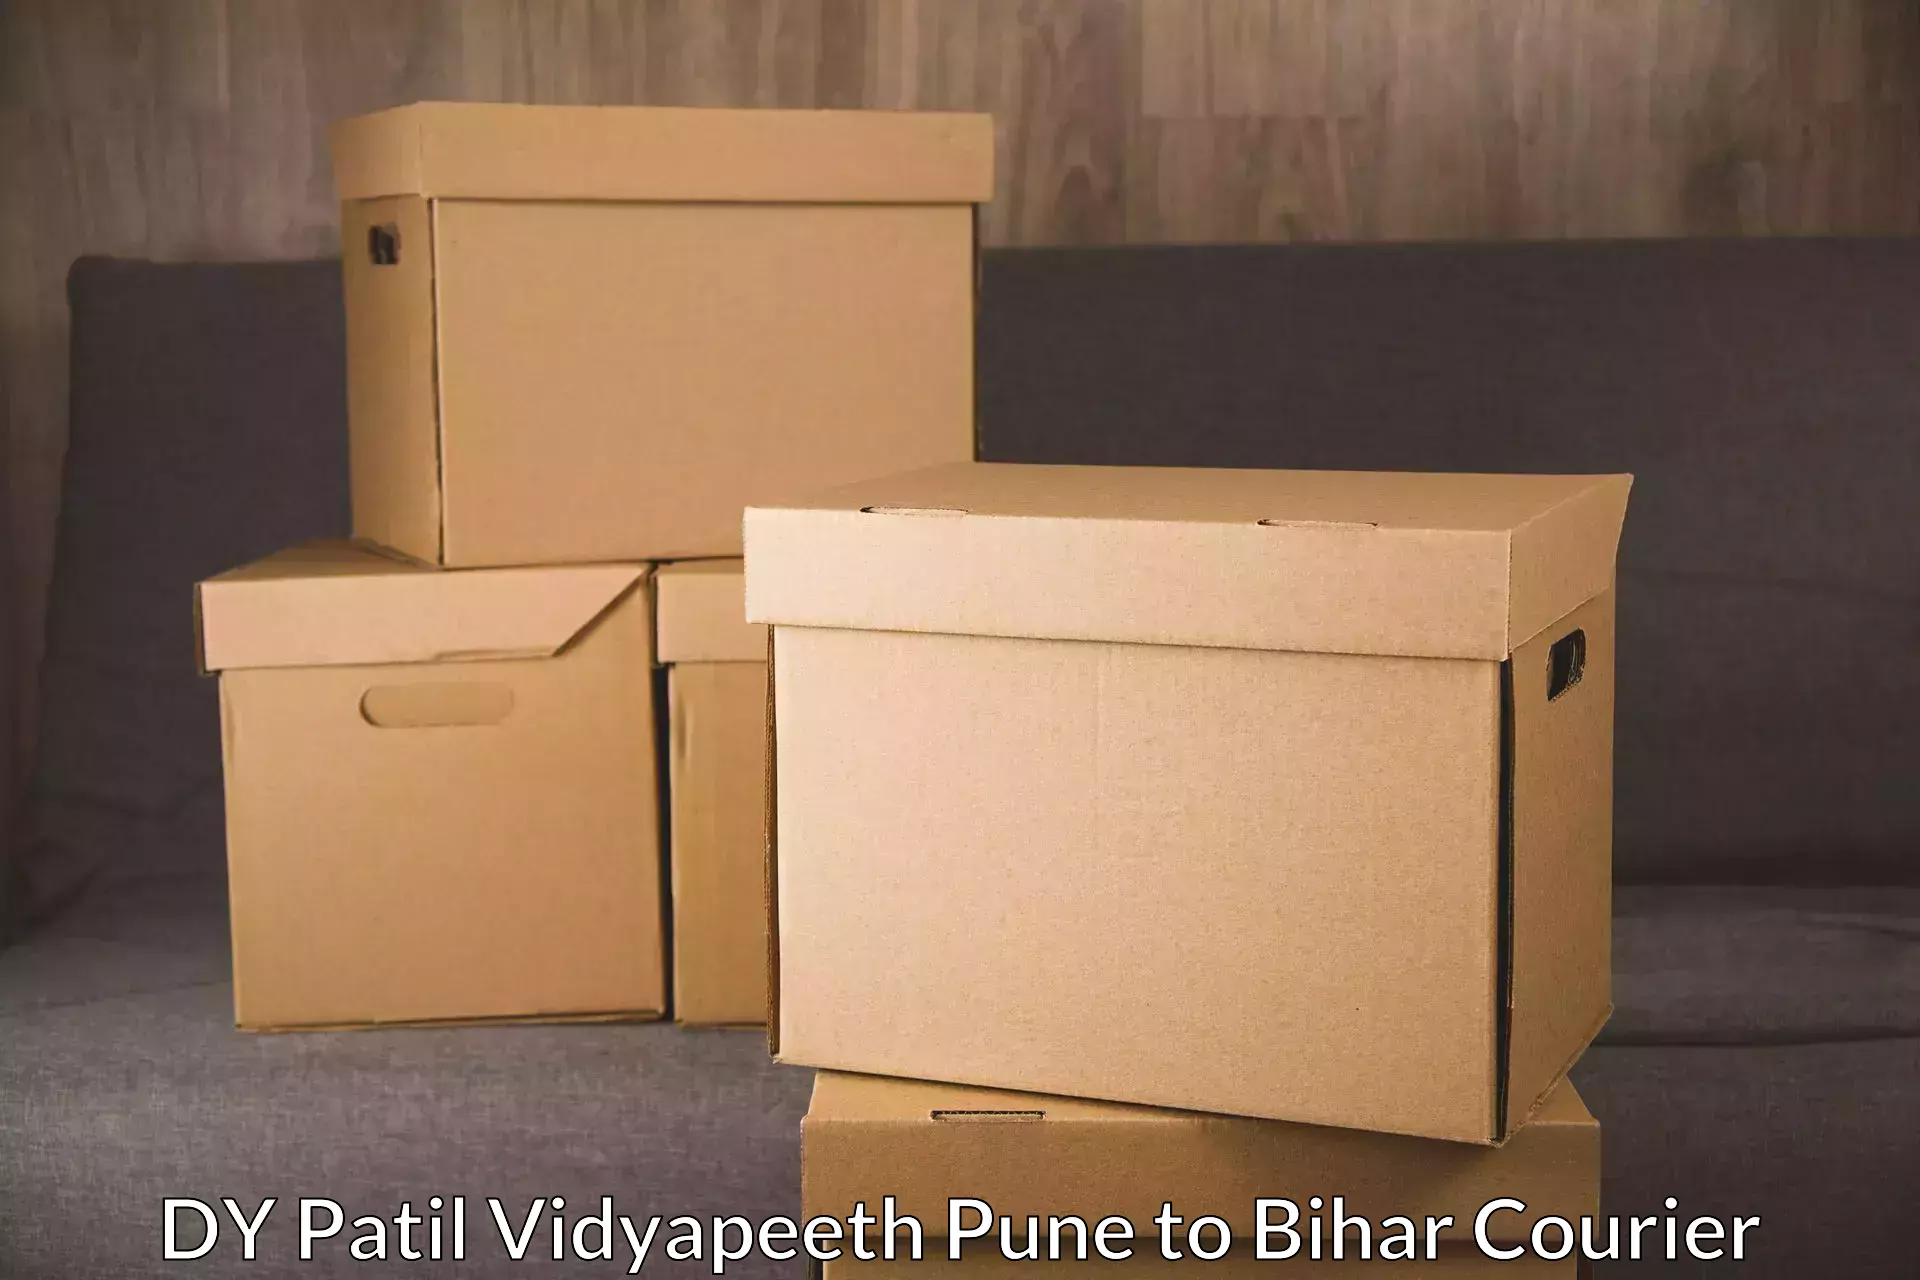 Tailored shipping services DY Patil Vidyapeeth Pune to Bihar